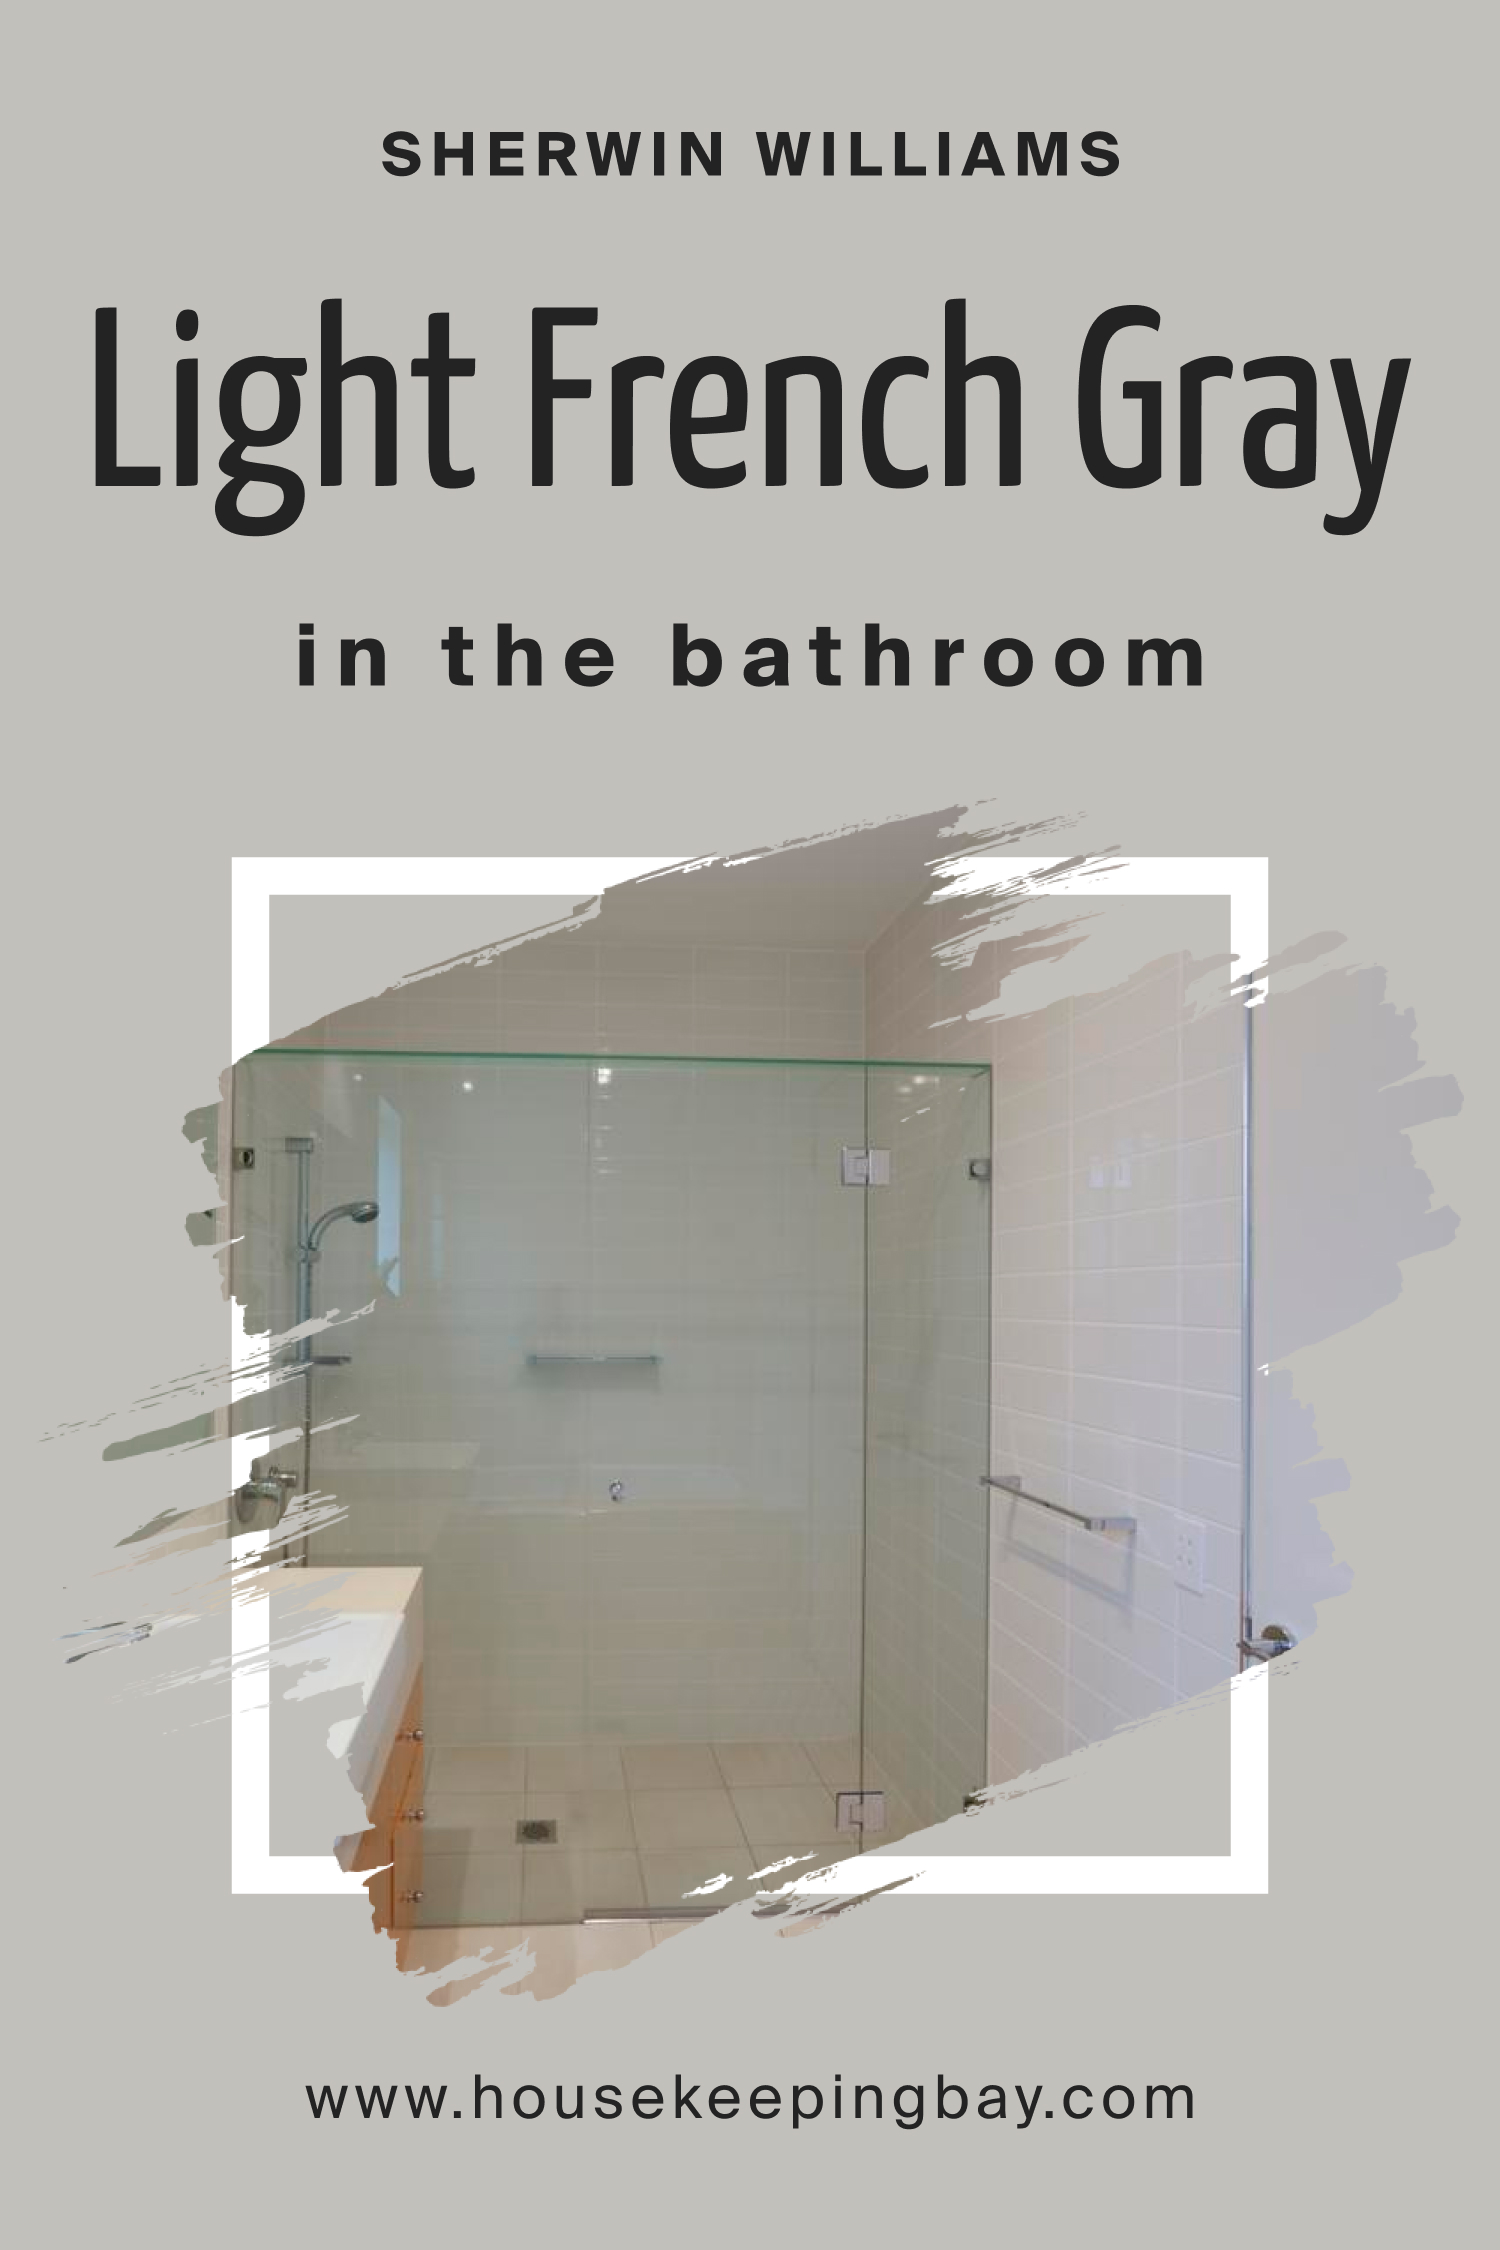 Sherwin Williams. Light French Gray in the Bathroom